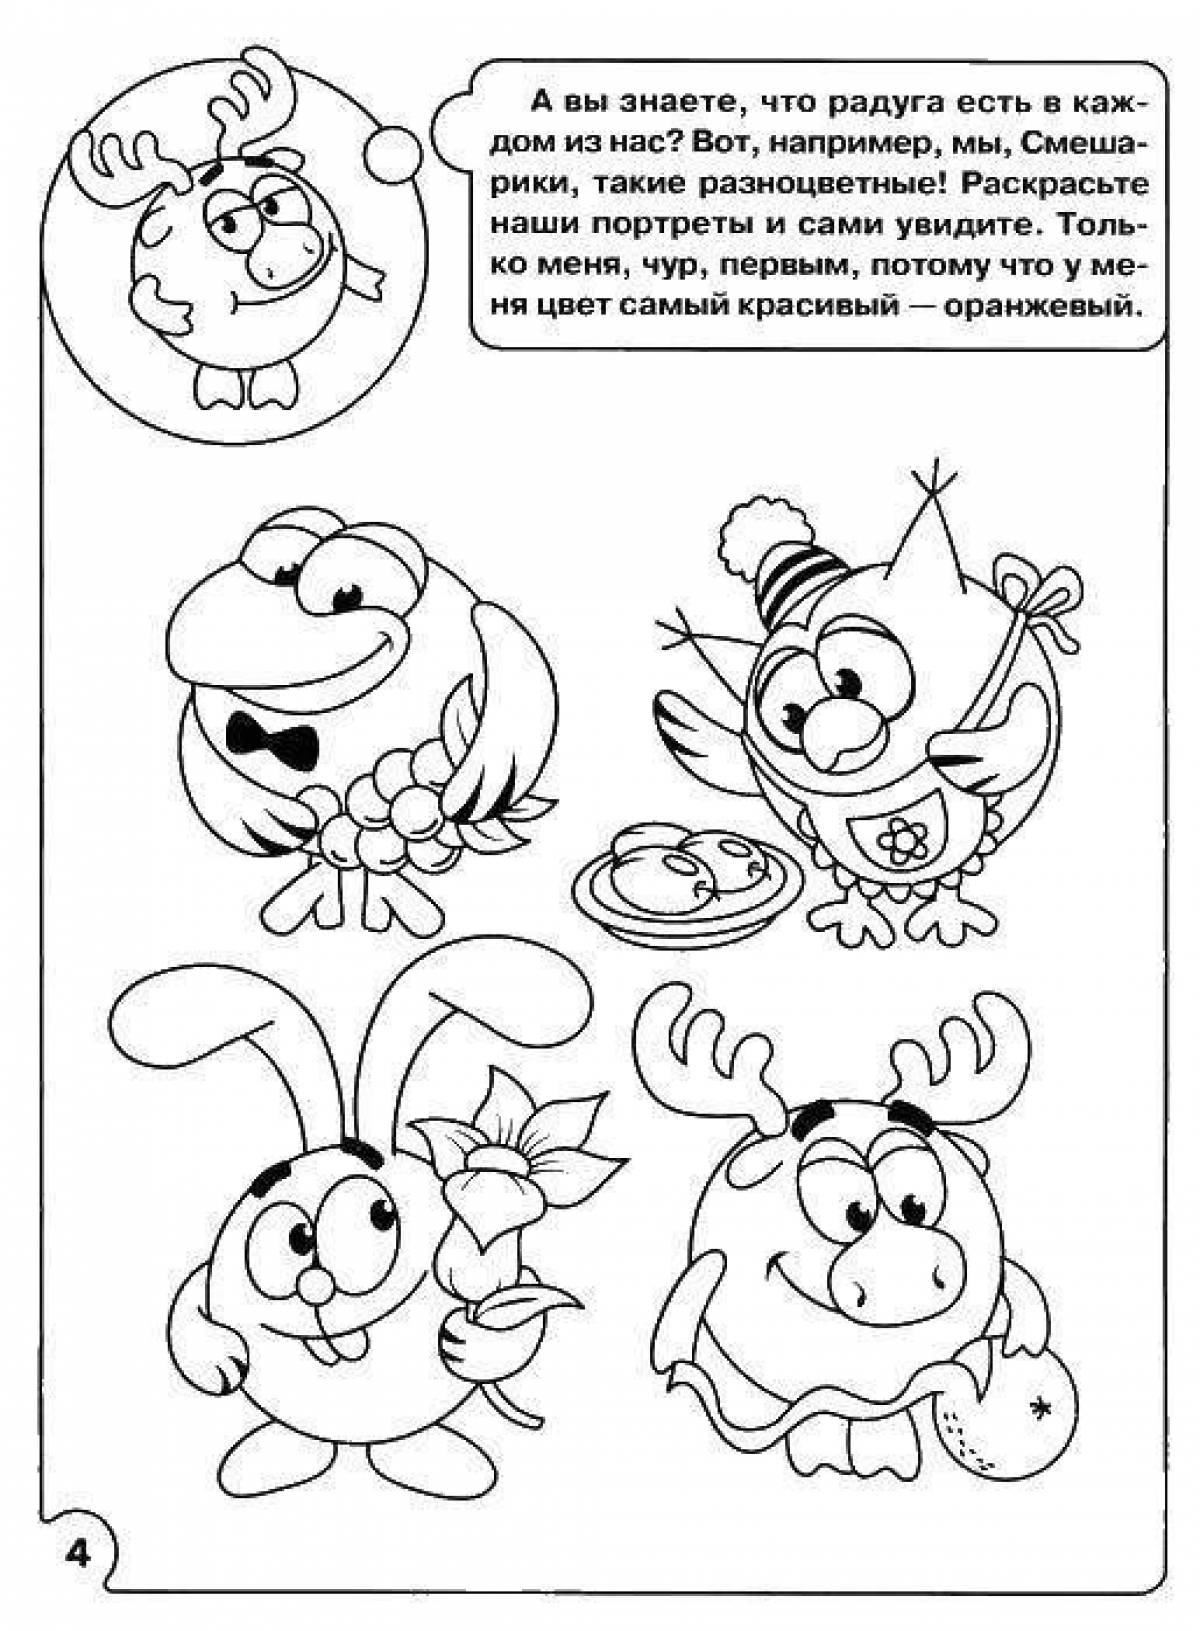 Dazzlingly smart Smeshariki coloring pages